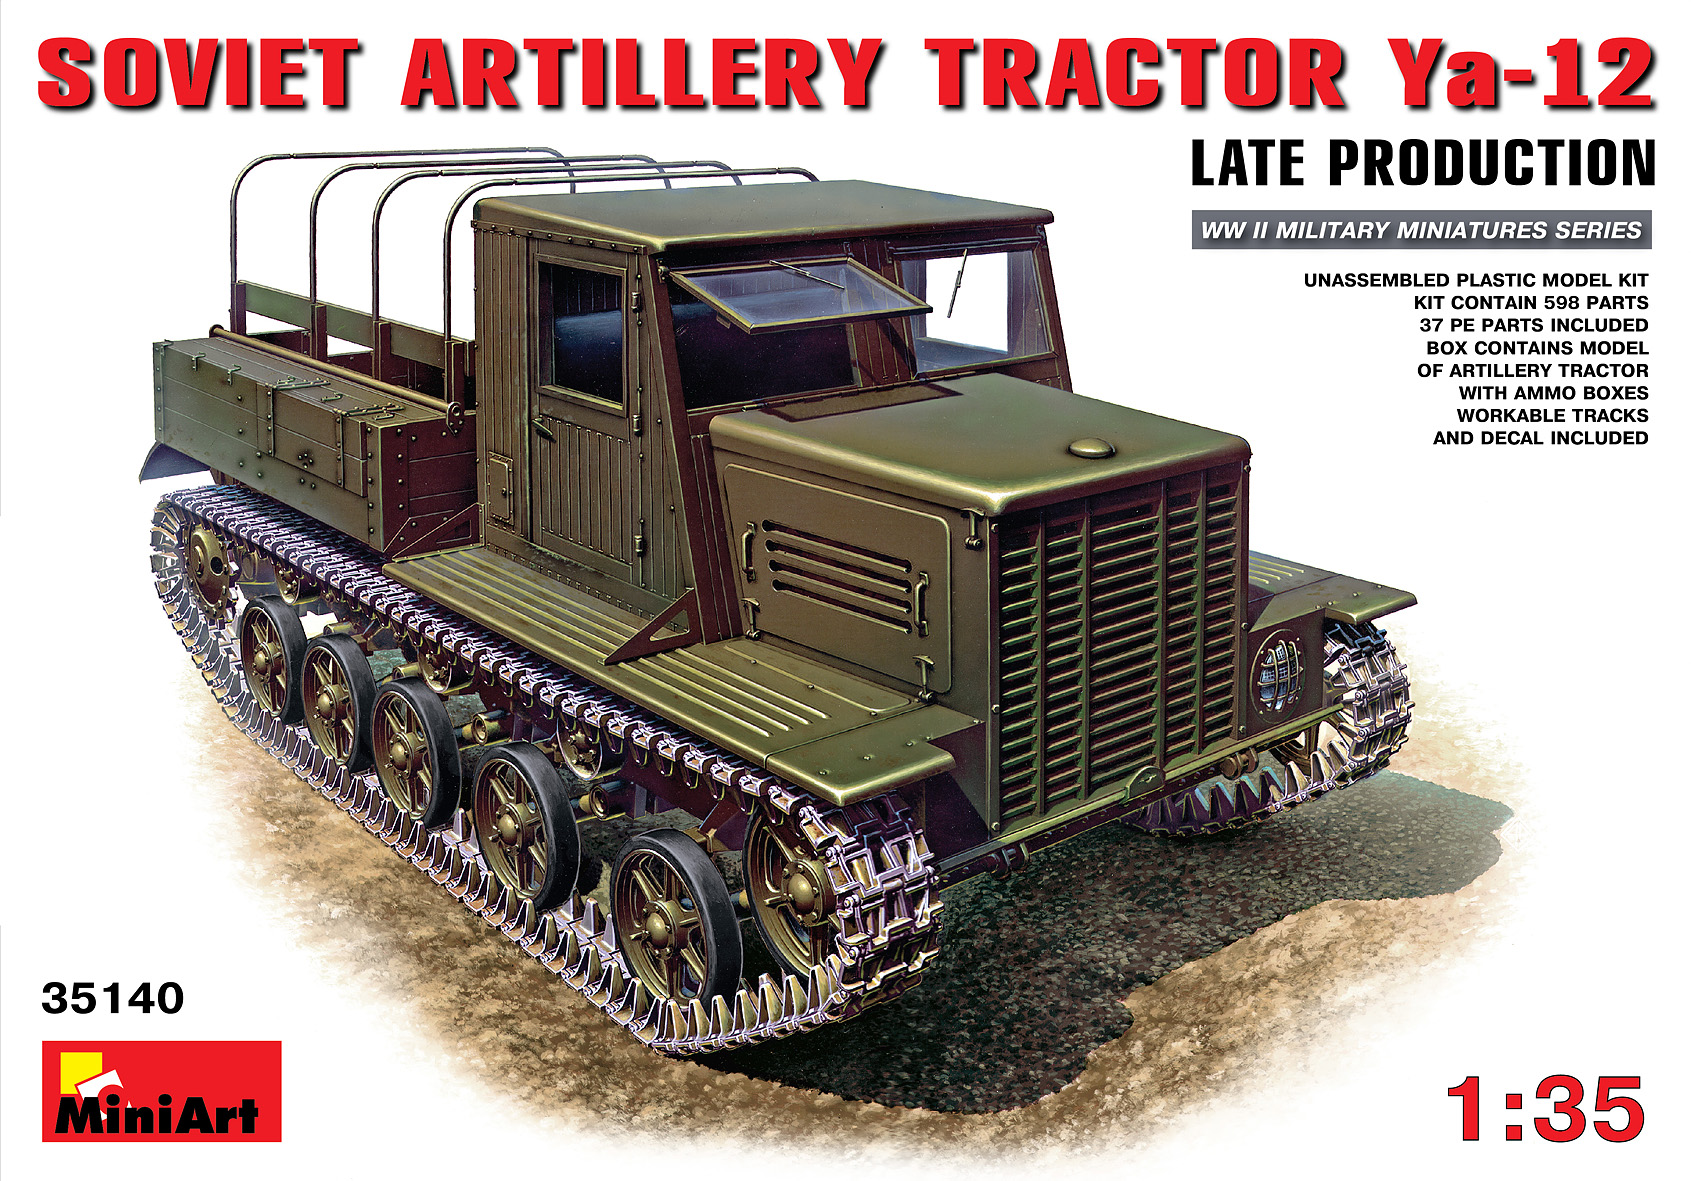 Soviet Artillery Tractor Ya-12 Late Production